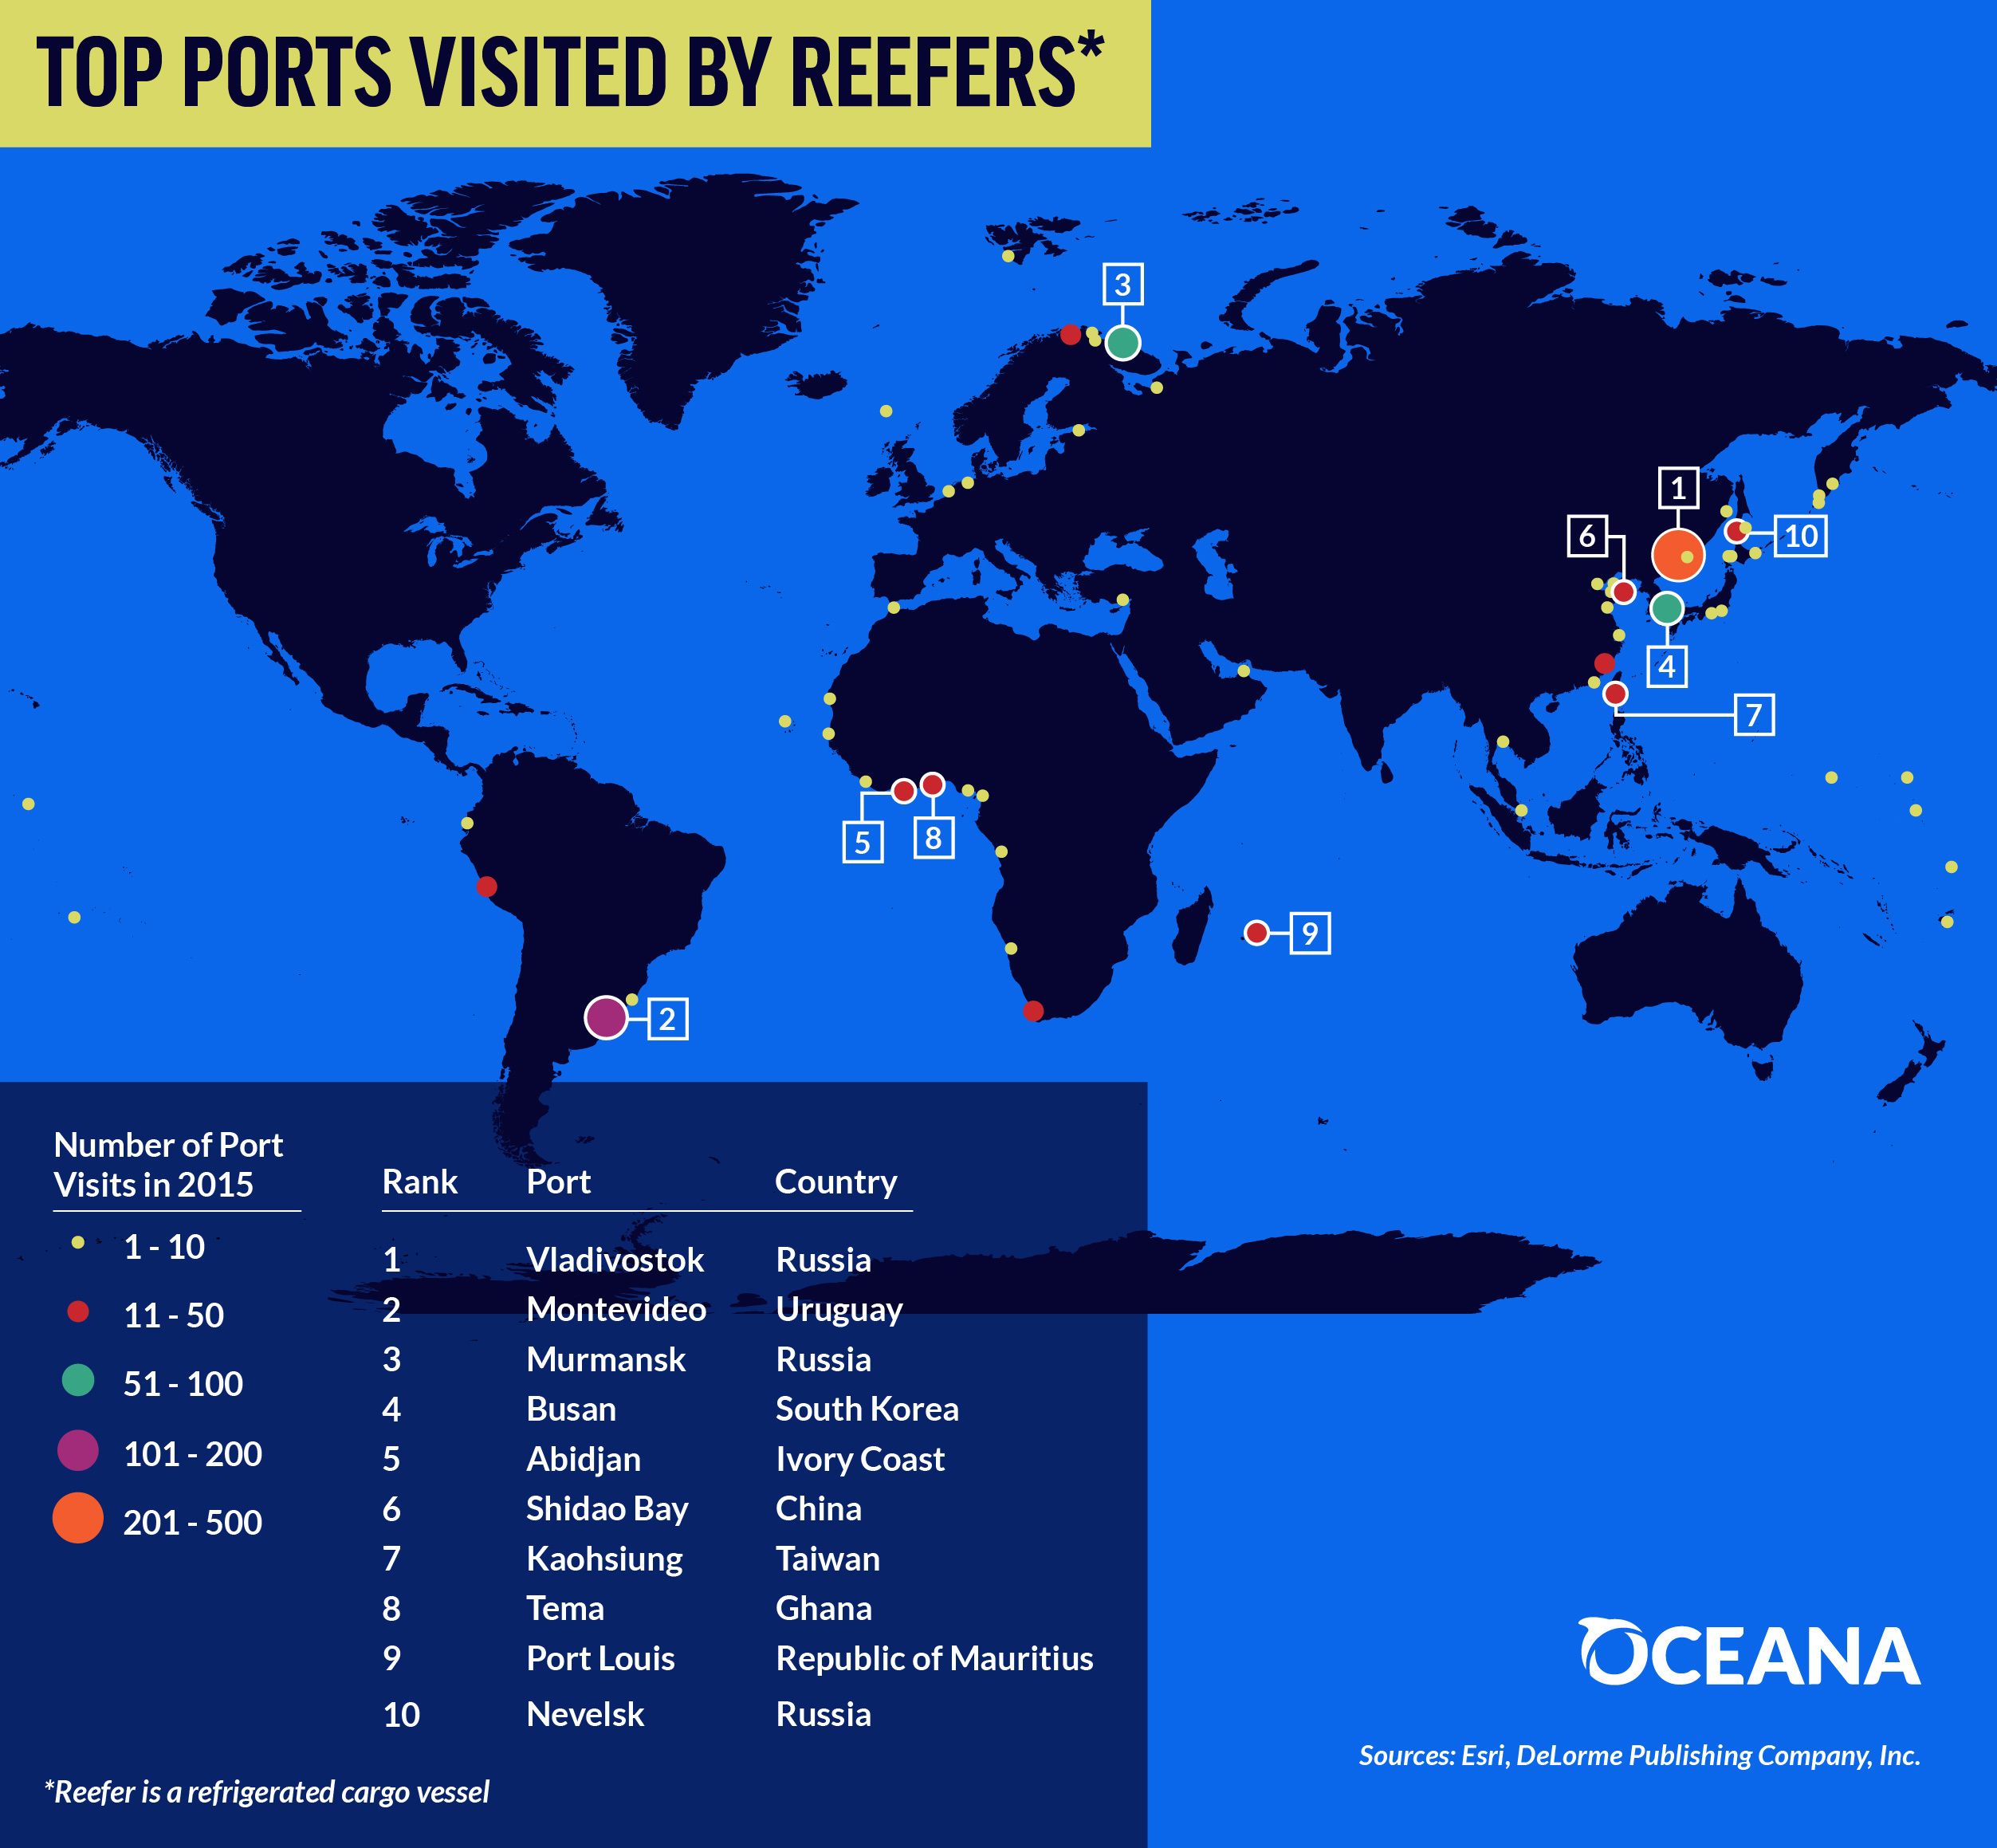 Top Ports Visited by Reeferes